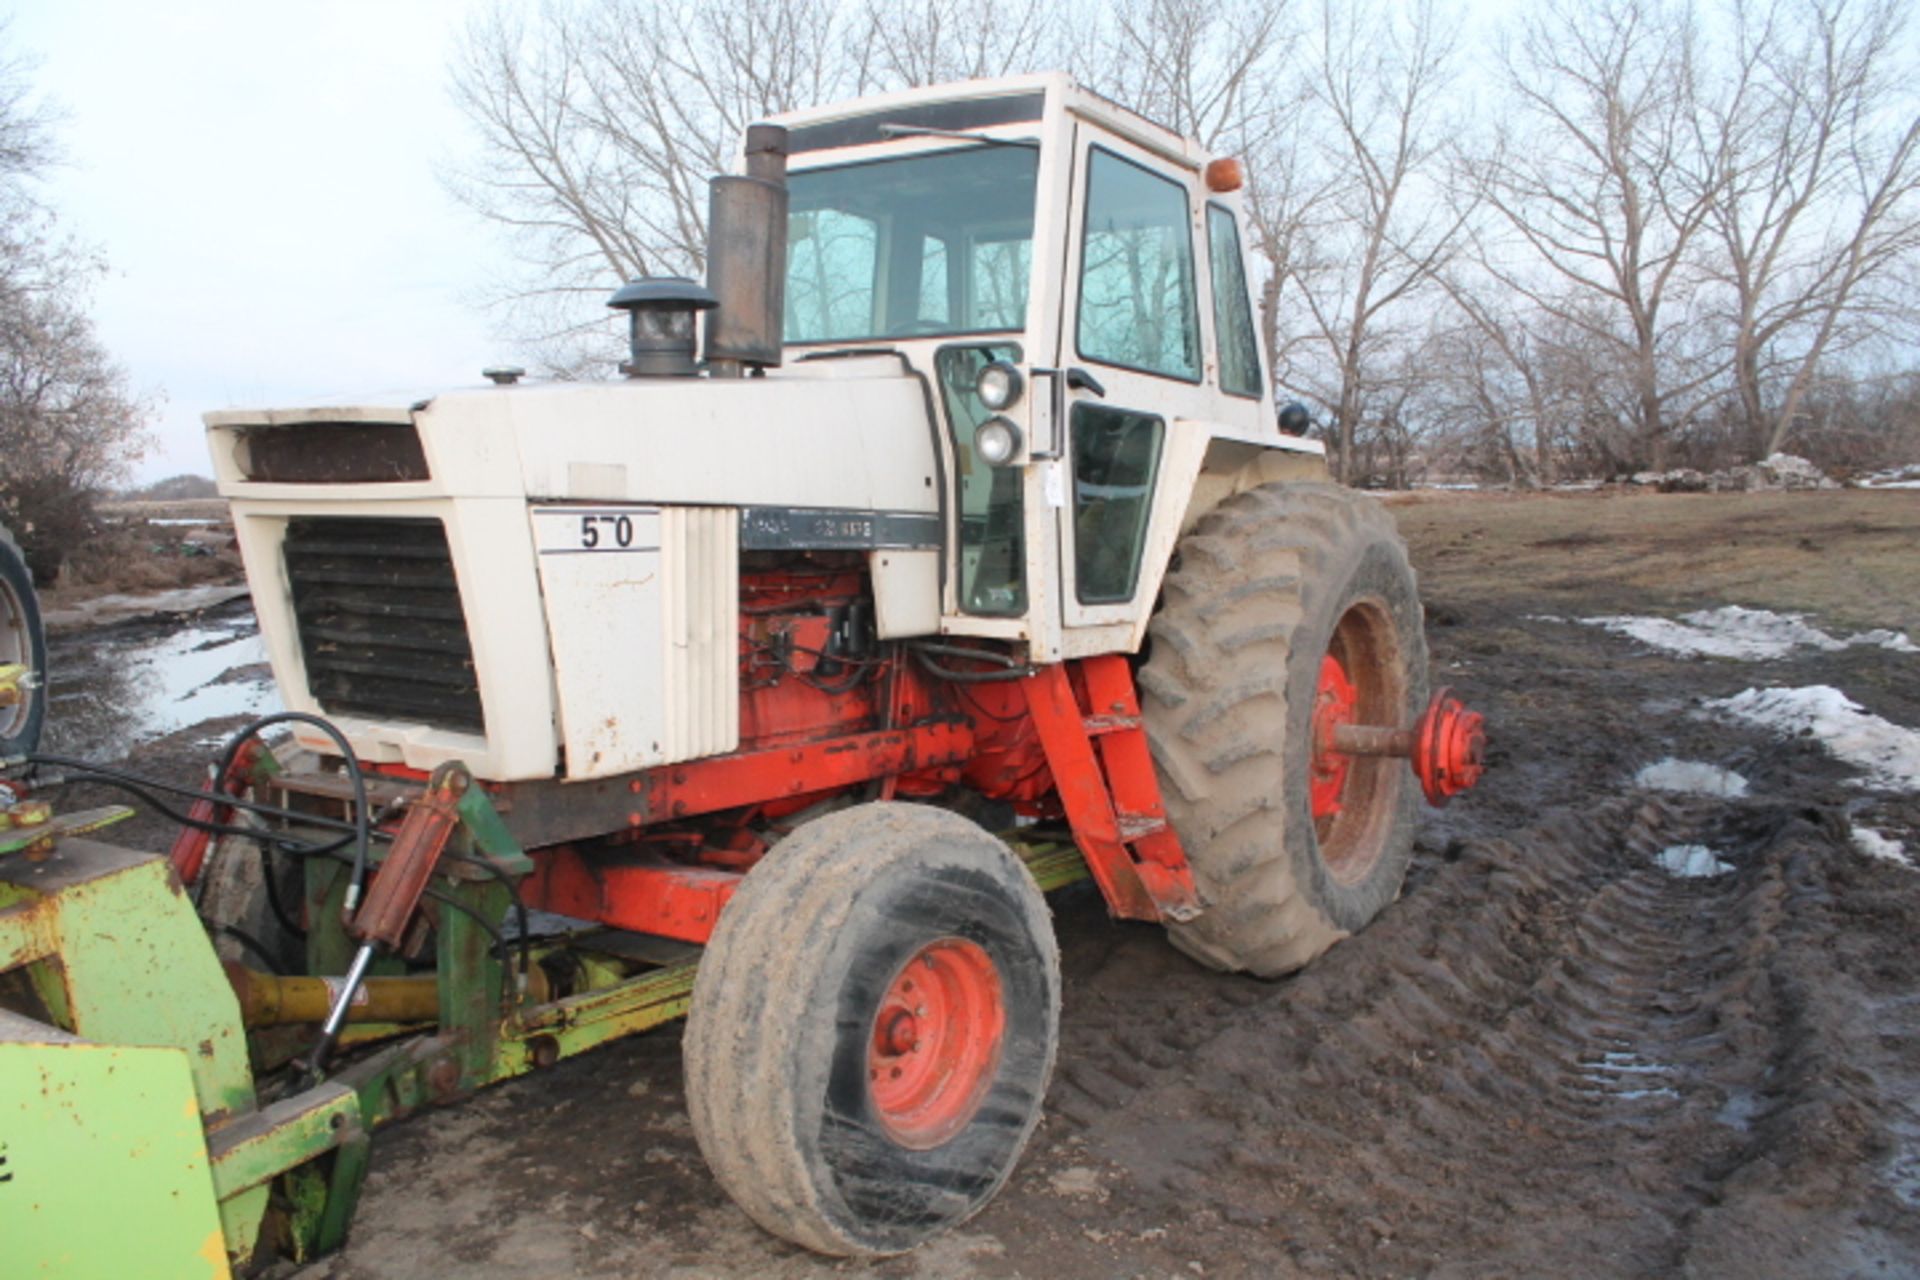 1978 Case 1570, 2 hyds, PTO, 20.8x38 good tires, PS trans.,  showing 6569hrs, SN 8819944 NOTE